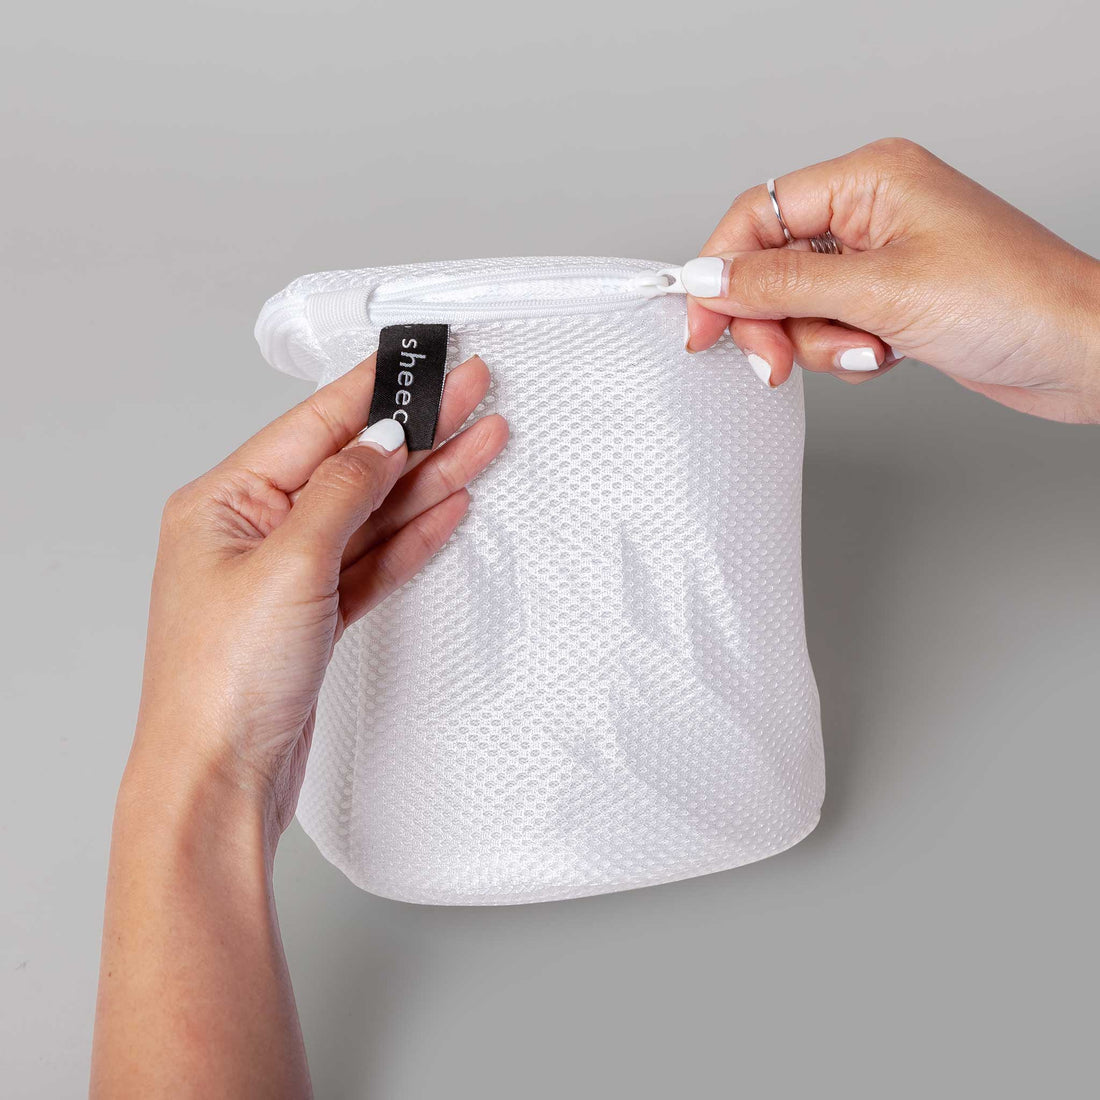 CAROOTU Bra Mesh Laundry Bags Anti-Deformation Lingerie Washing Bag with  Handle for Drying Zipper Closure